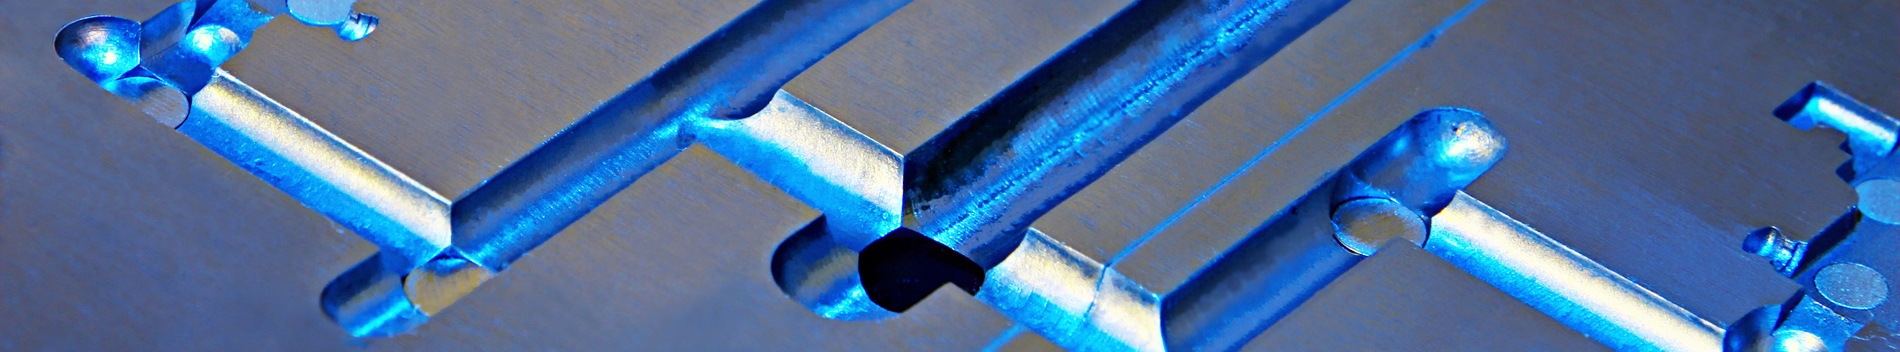 Suppliers of Nickel Alloys, Titanium and Stainless Steels